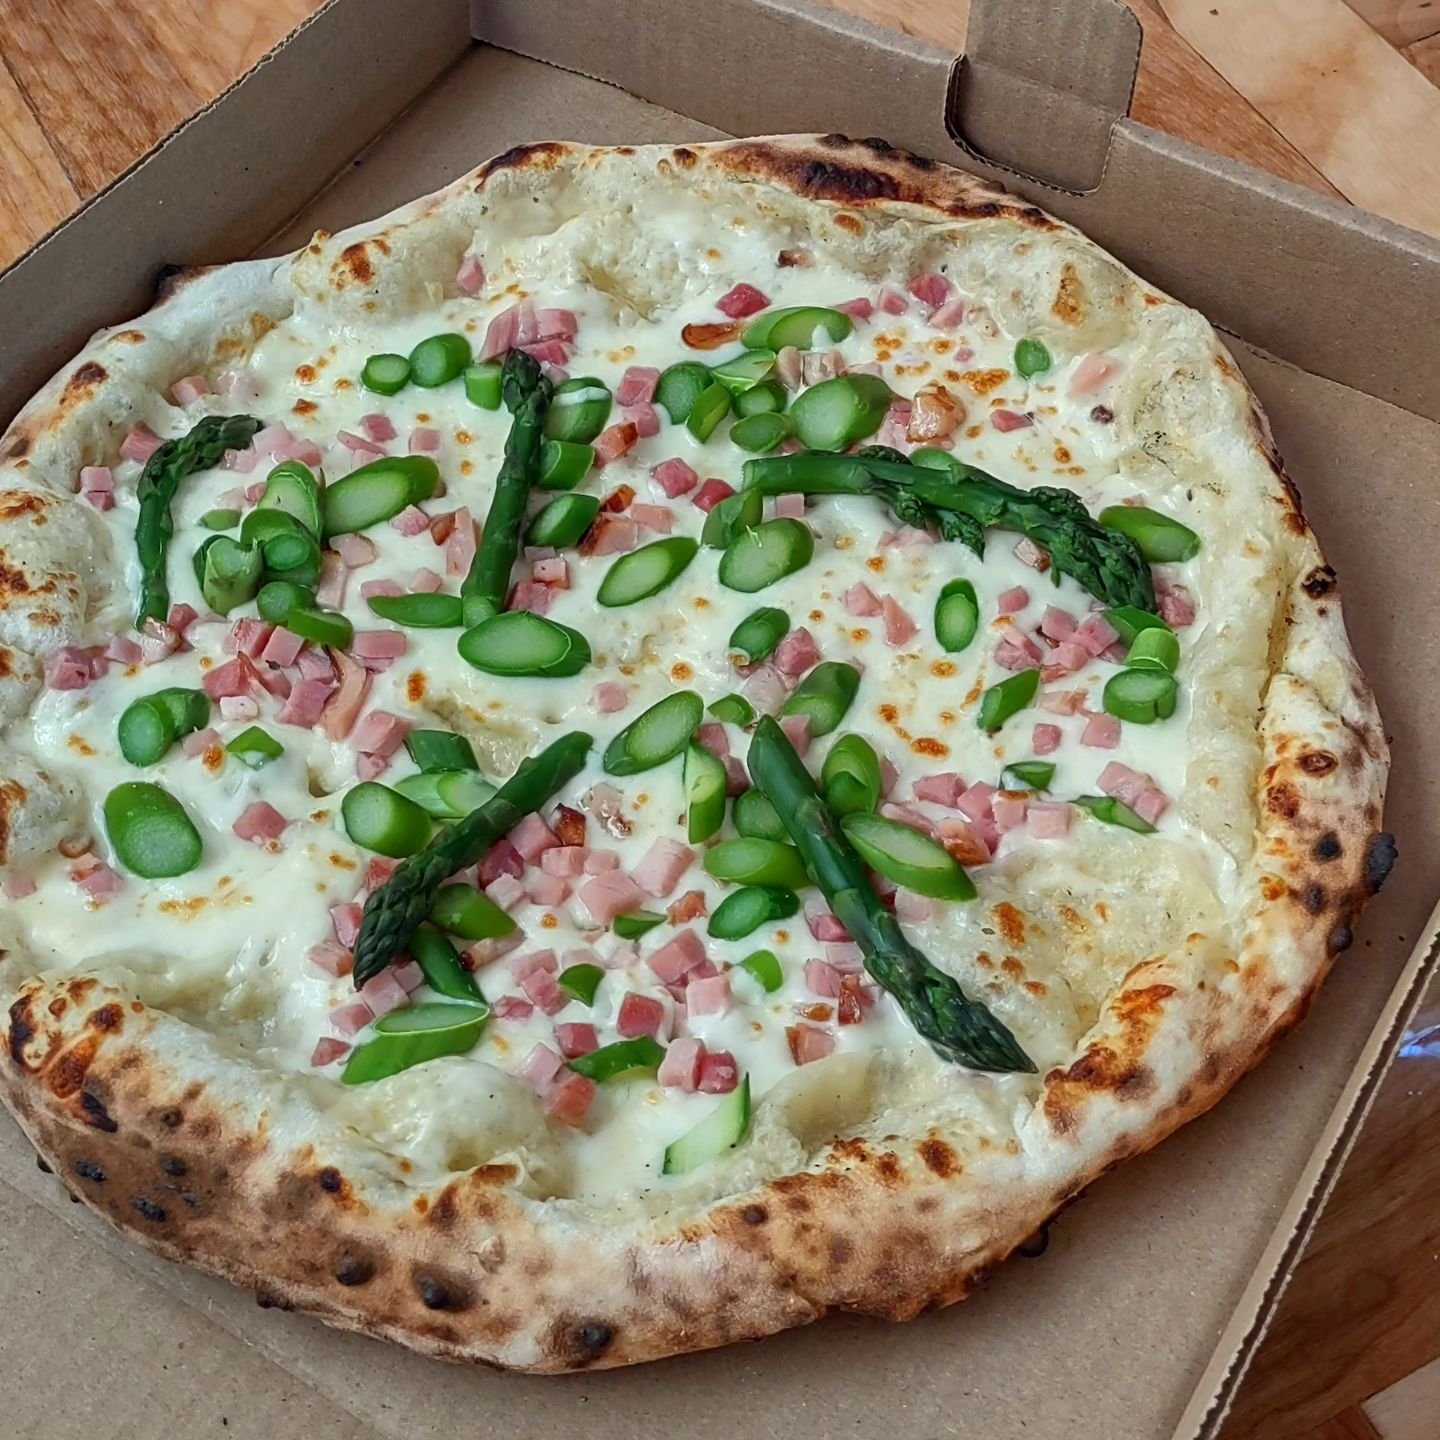 It's asparagus season!! So time to bring back our pizza special with asparagus &amp; ham on creamy roasted garlic sauce 🤤

Did you try this one last year?

Today we will be at @OleFoggy Distillery from 12-7pm. We hope to see you there! 👋🤩

#aspara